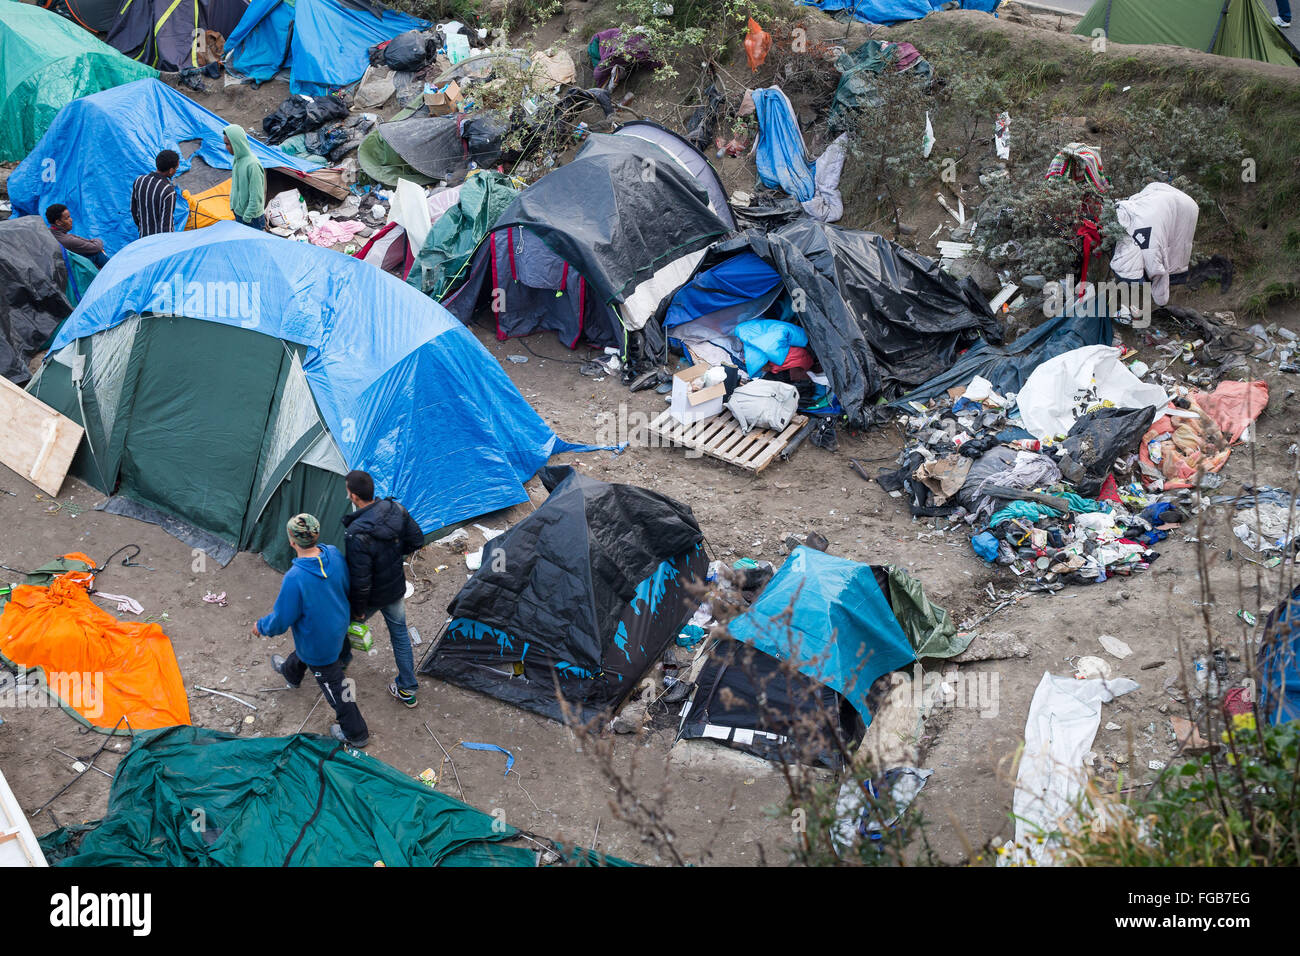 Men walk through makeshift shelters in the crowded Jungle Refugee Camp, Calais, France. Stock Photo